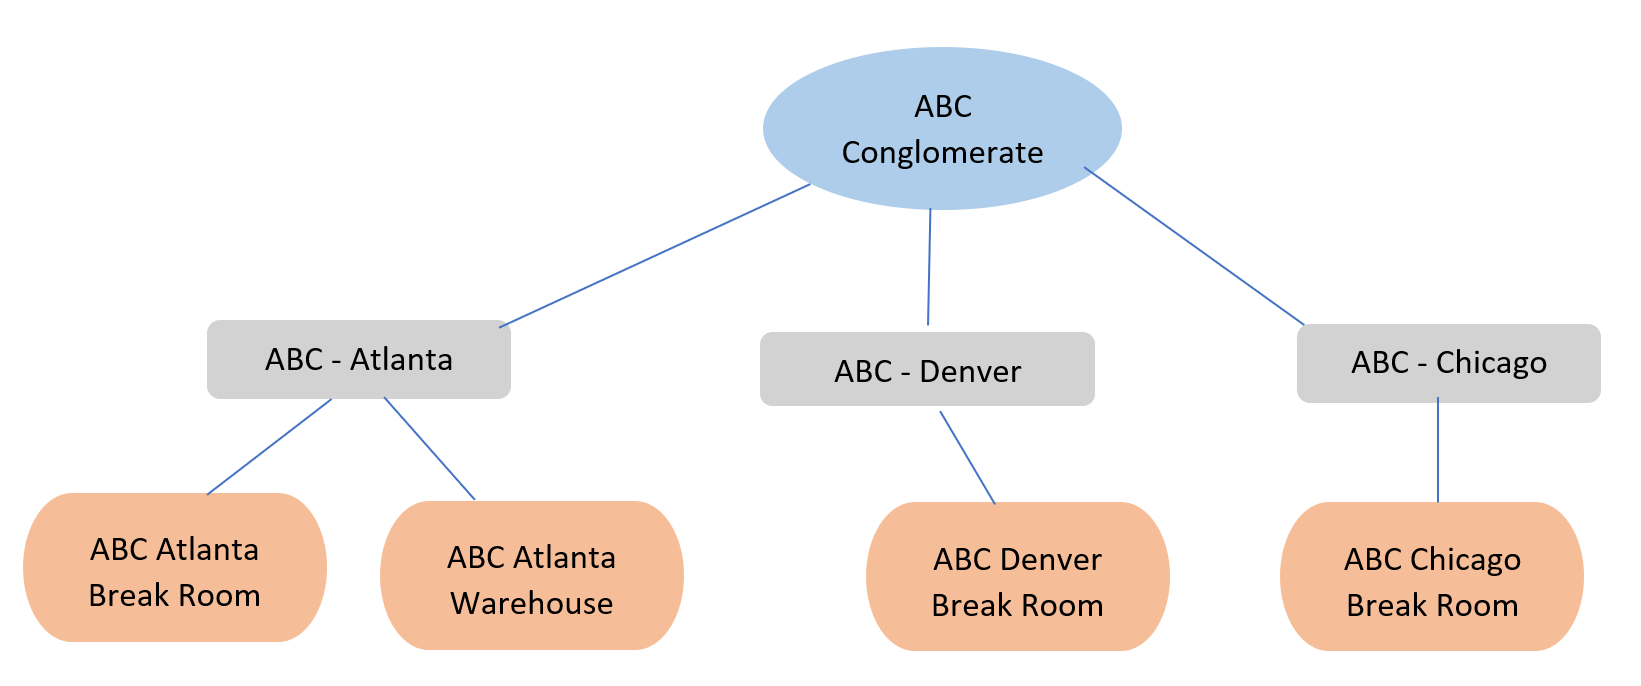 ABC COnglomerate Data Tree.png